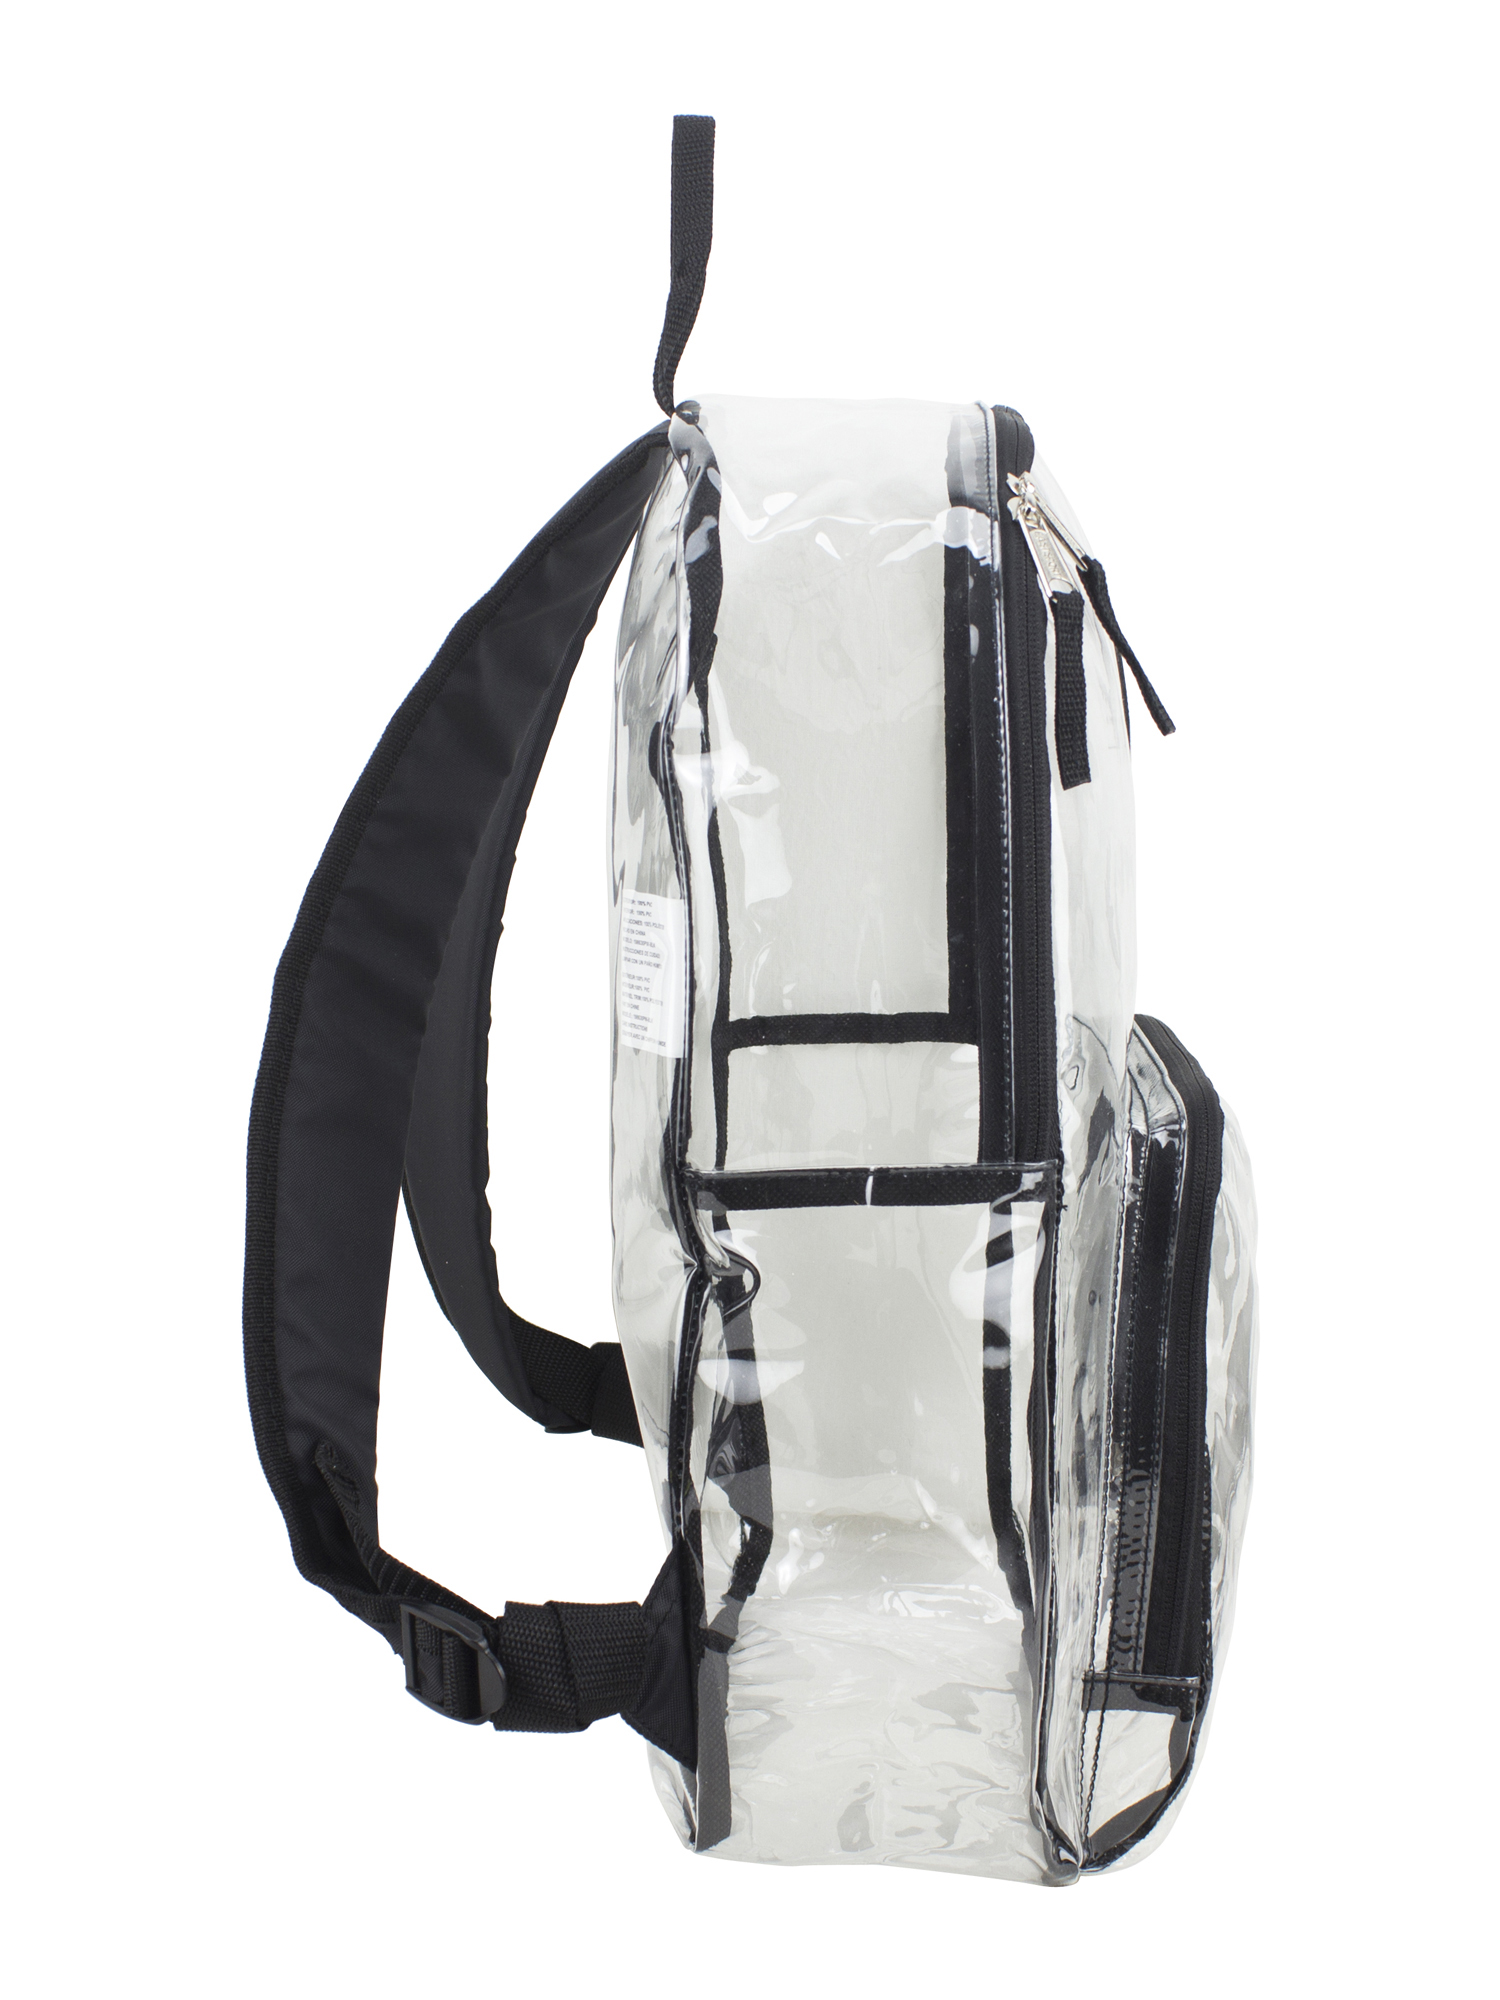 Eastsport Unisex Multi-Purpose Clear Backpack with Front Pocket, Adjustable Straps and Lash Tab Clear - image 4 of 6